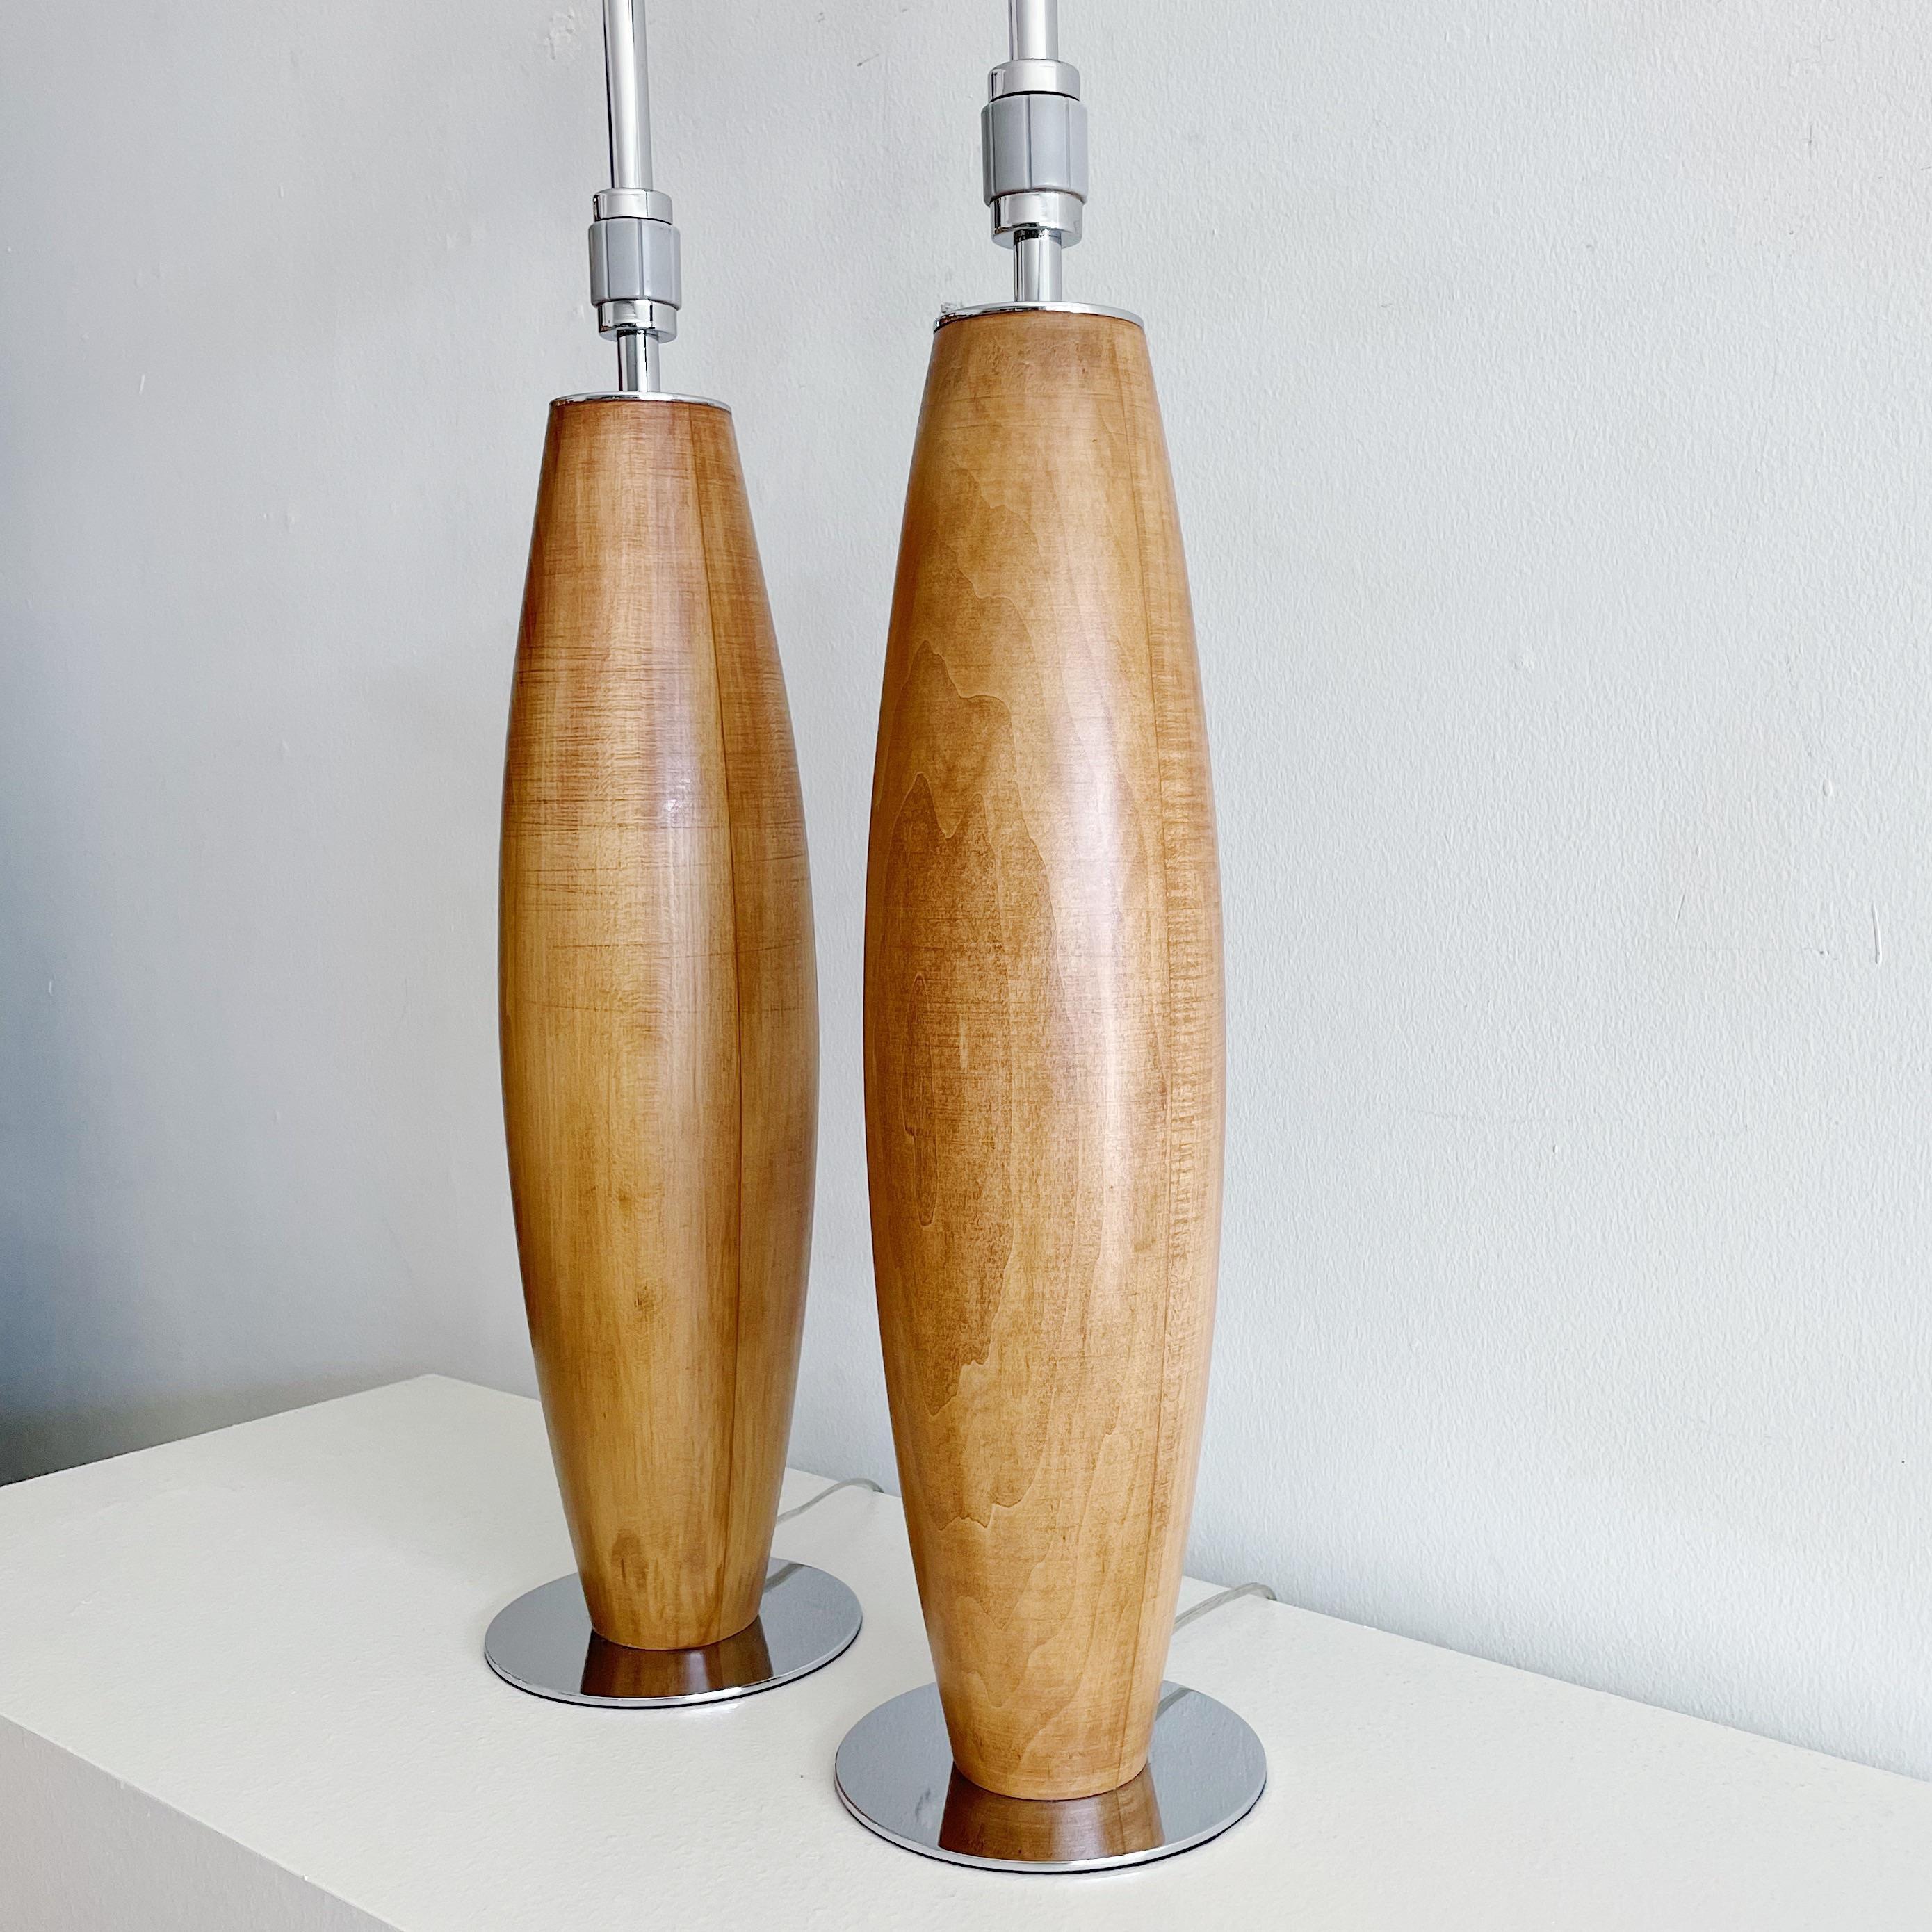 Pair of Stewart Ross James hand turned walnut lamps on chrome bases for Hansen of New York. Fully restored and ready to use. Original signature 3 way rotating switch to lamp rod.
Actual diameter of Wood is 4.5